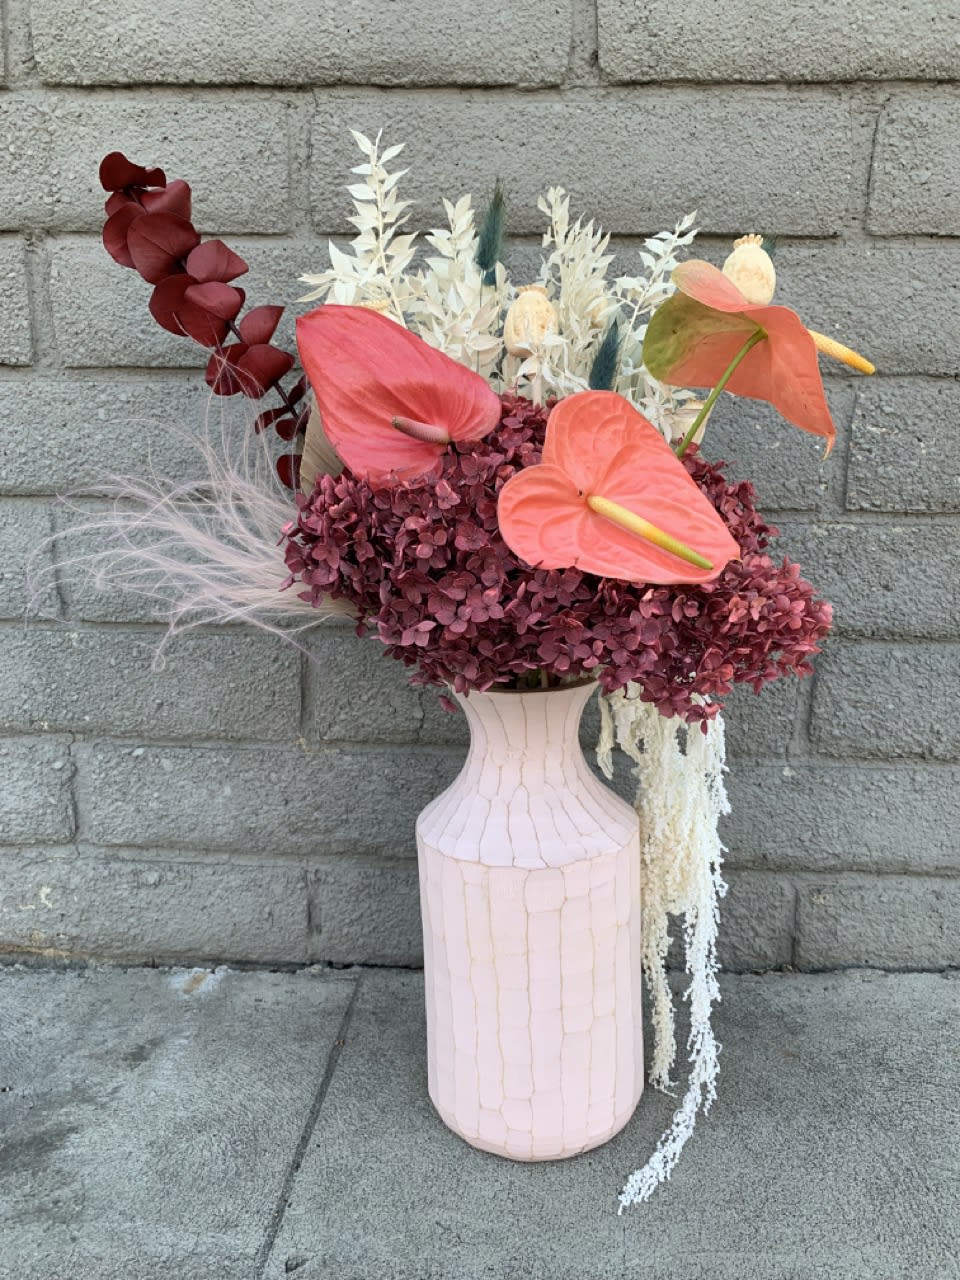 Sustainable composition in a vase with dried florals and fresh Anthurium.